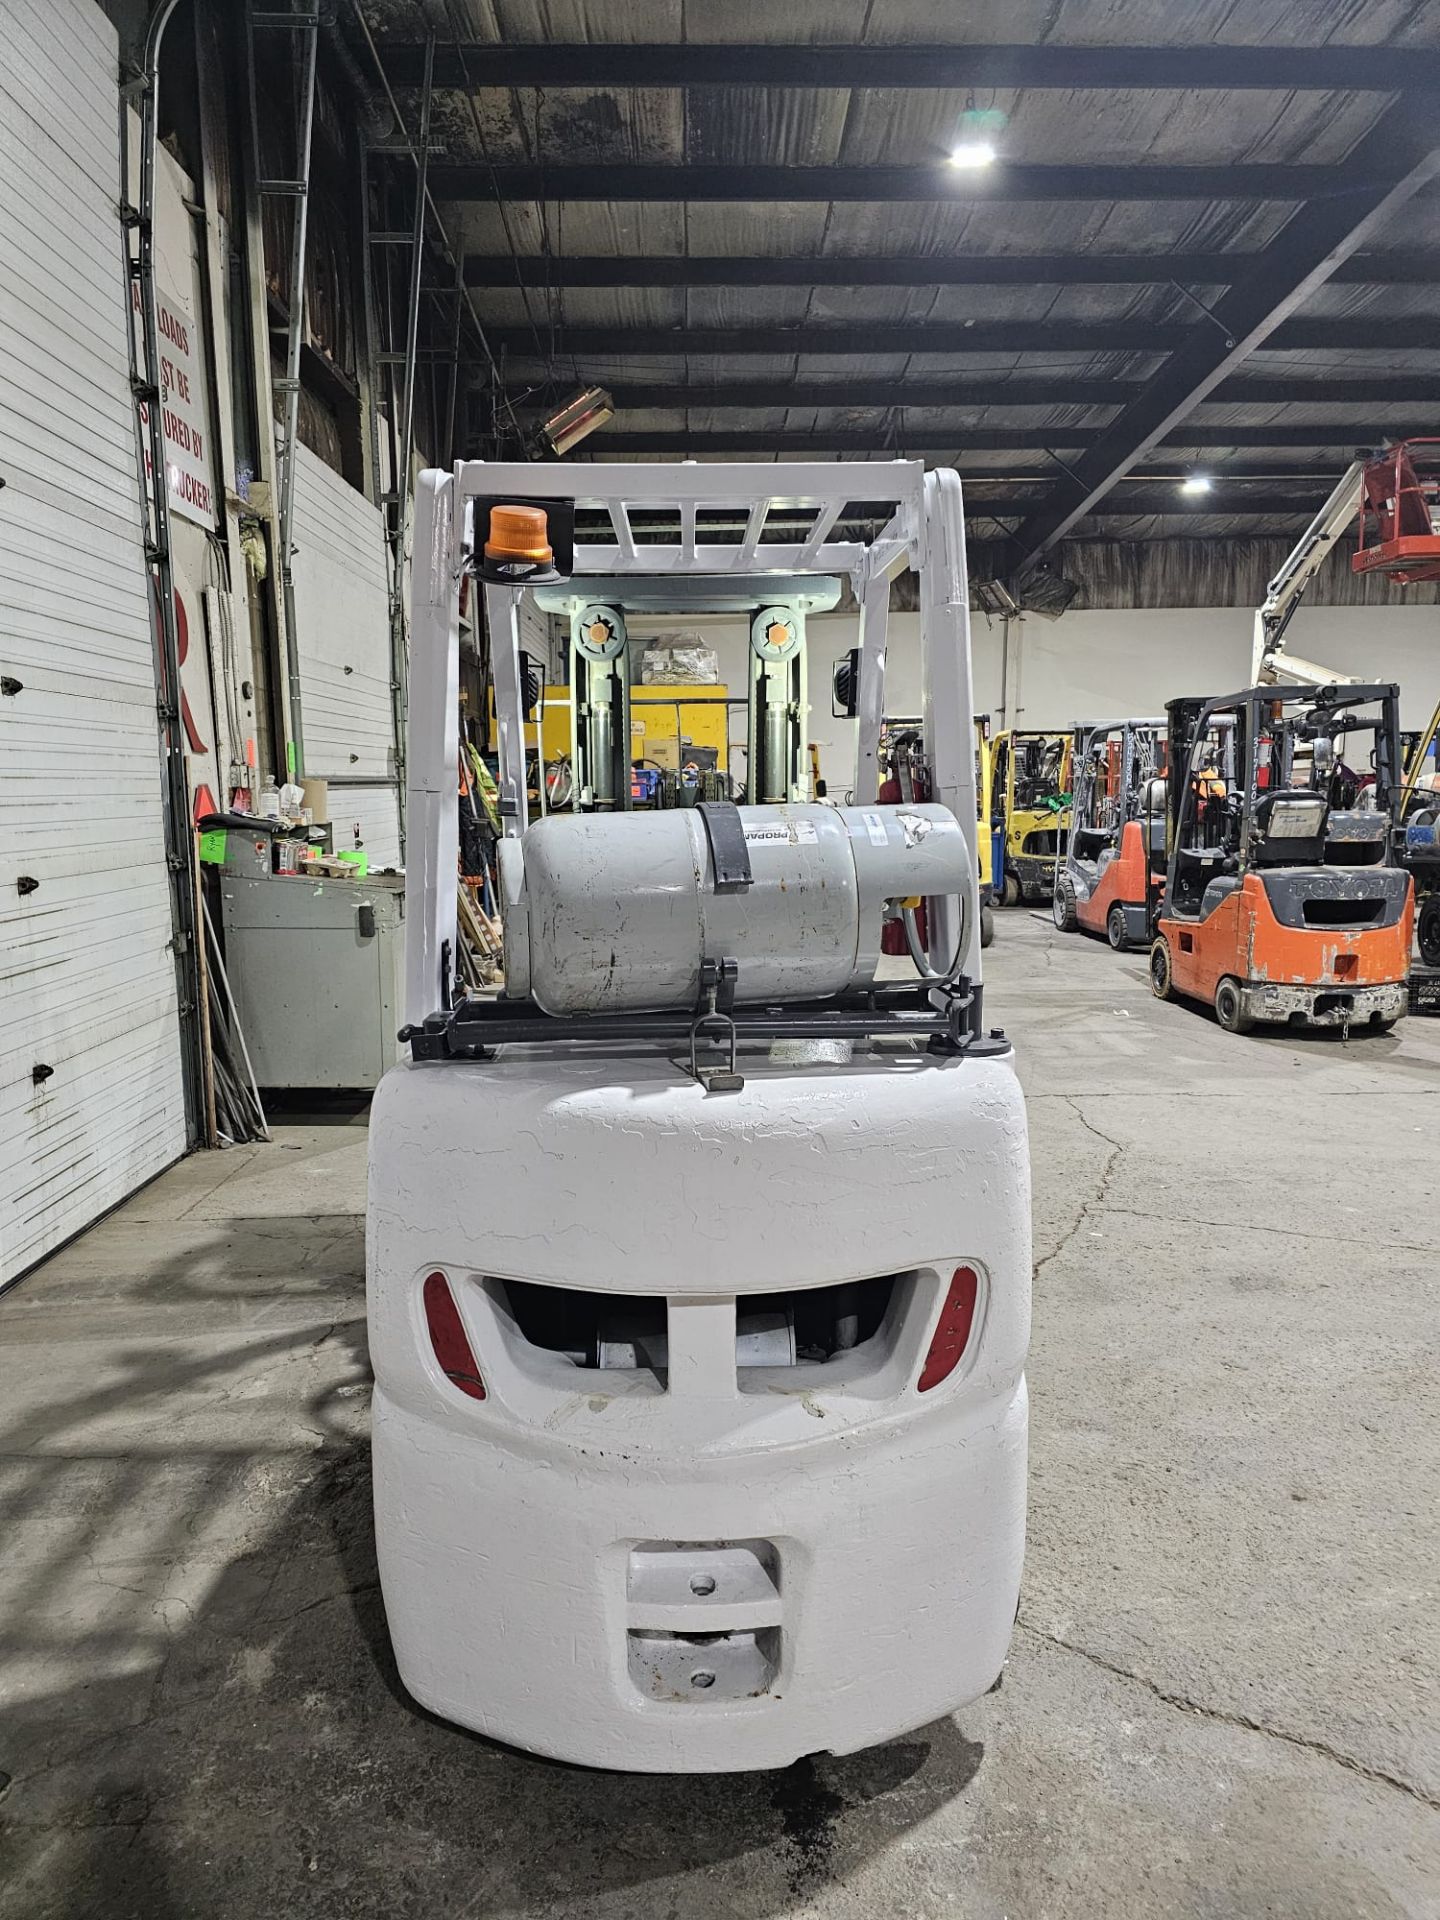 2015 Nissan 5000lbs Capacity LPG (Propane) Forklift 3-STAGE MAST with sideshift (no propane tank - Image 3 of 5